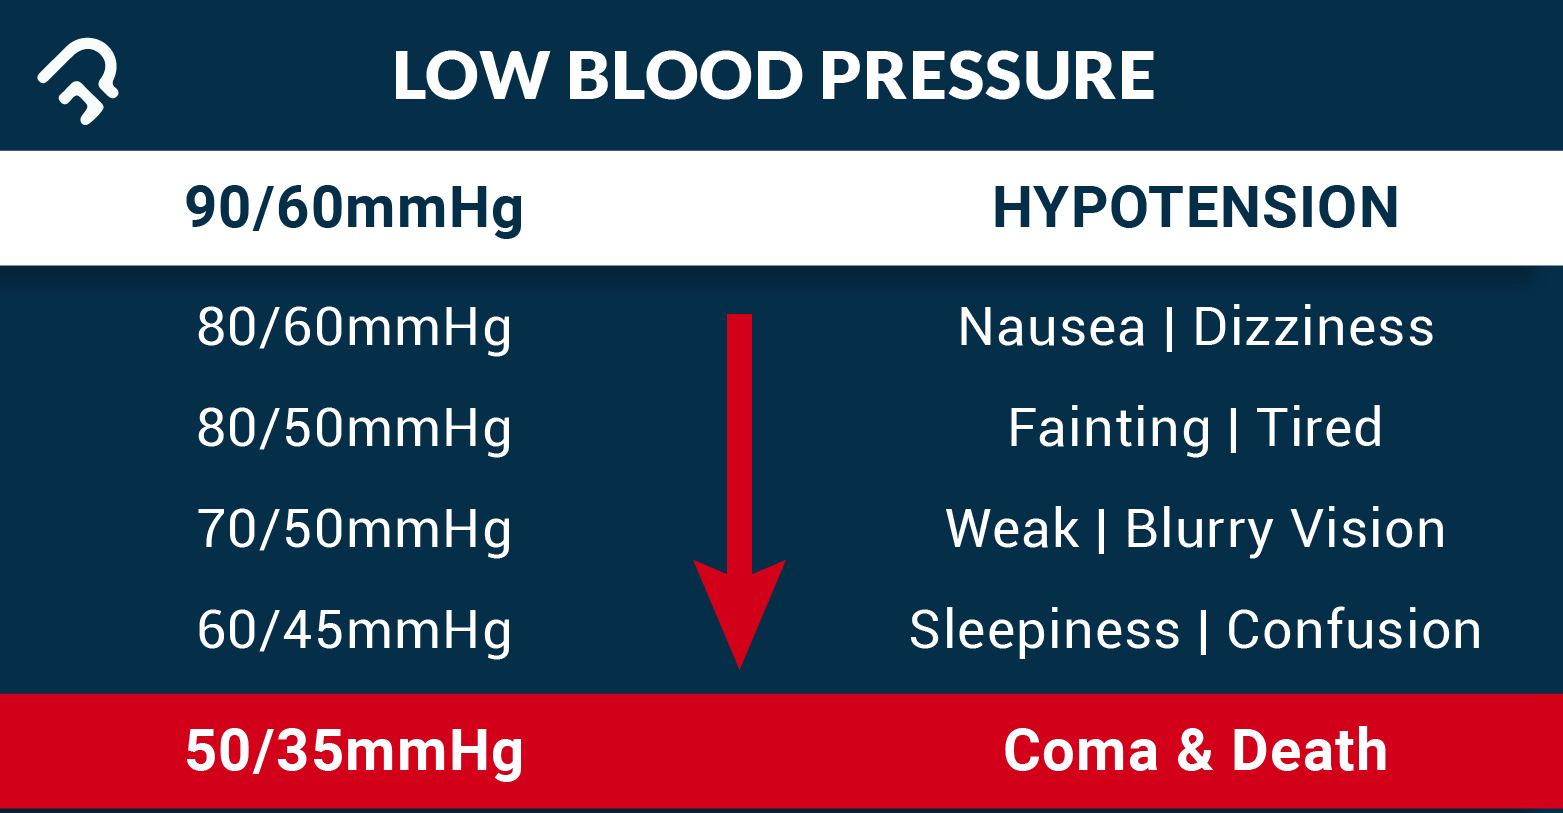 Low Blood Pressure: Precautions and Ways to Manage It